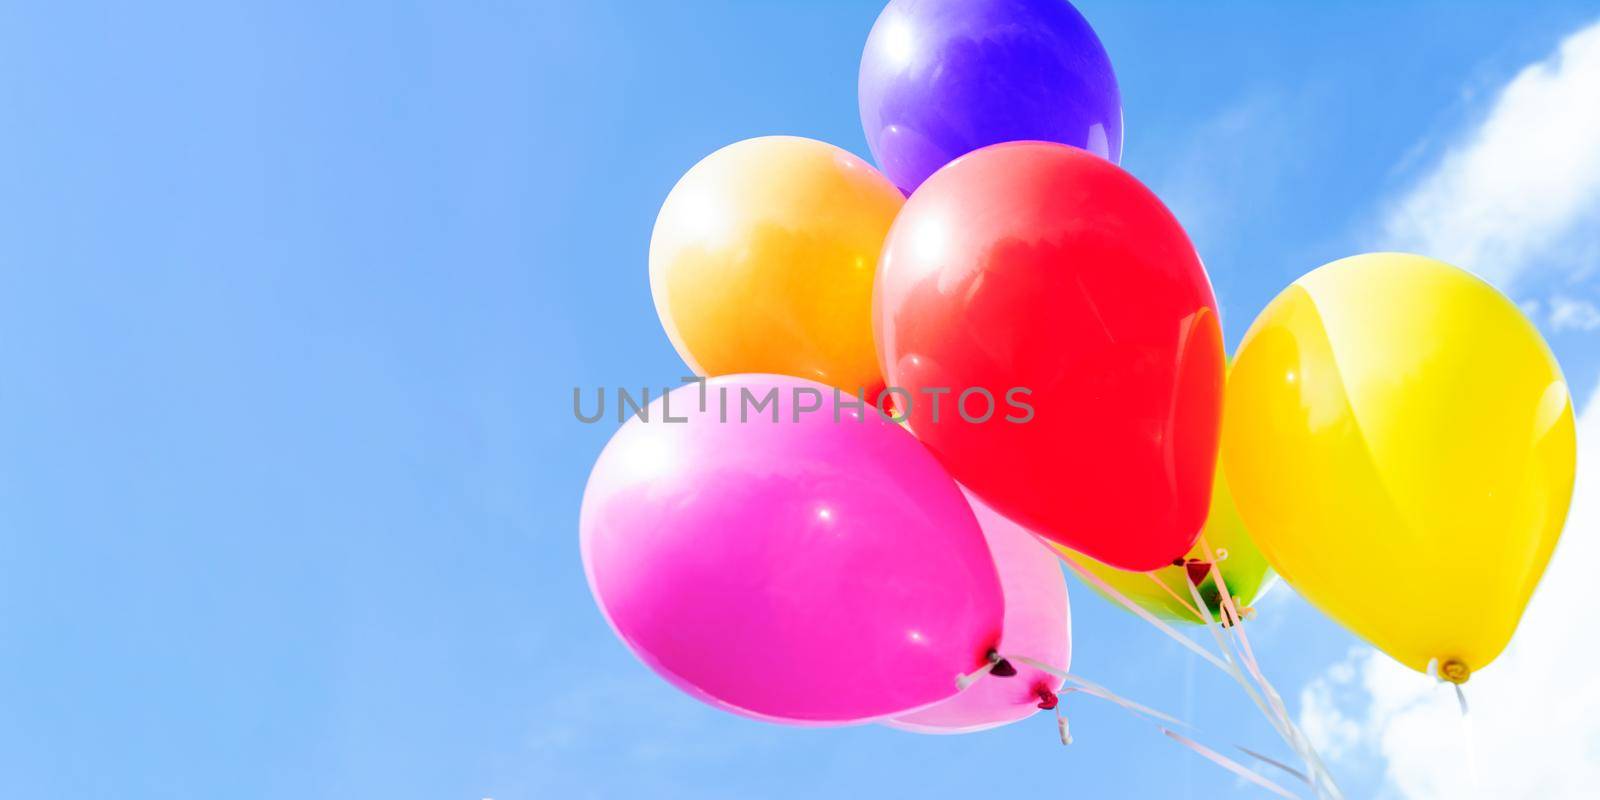 Group of colorful balloons by wdnet_studio